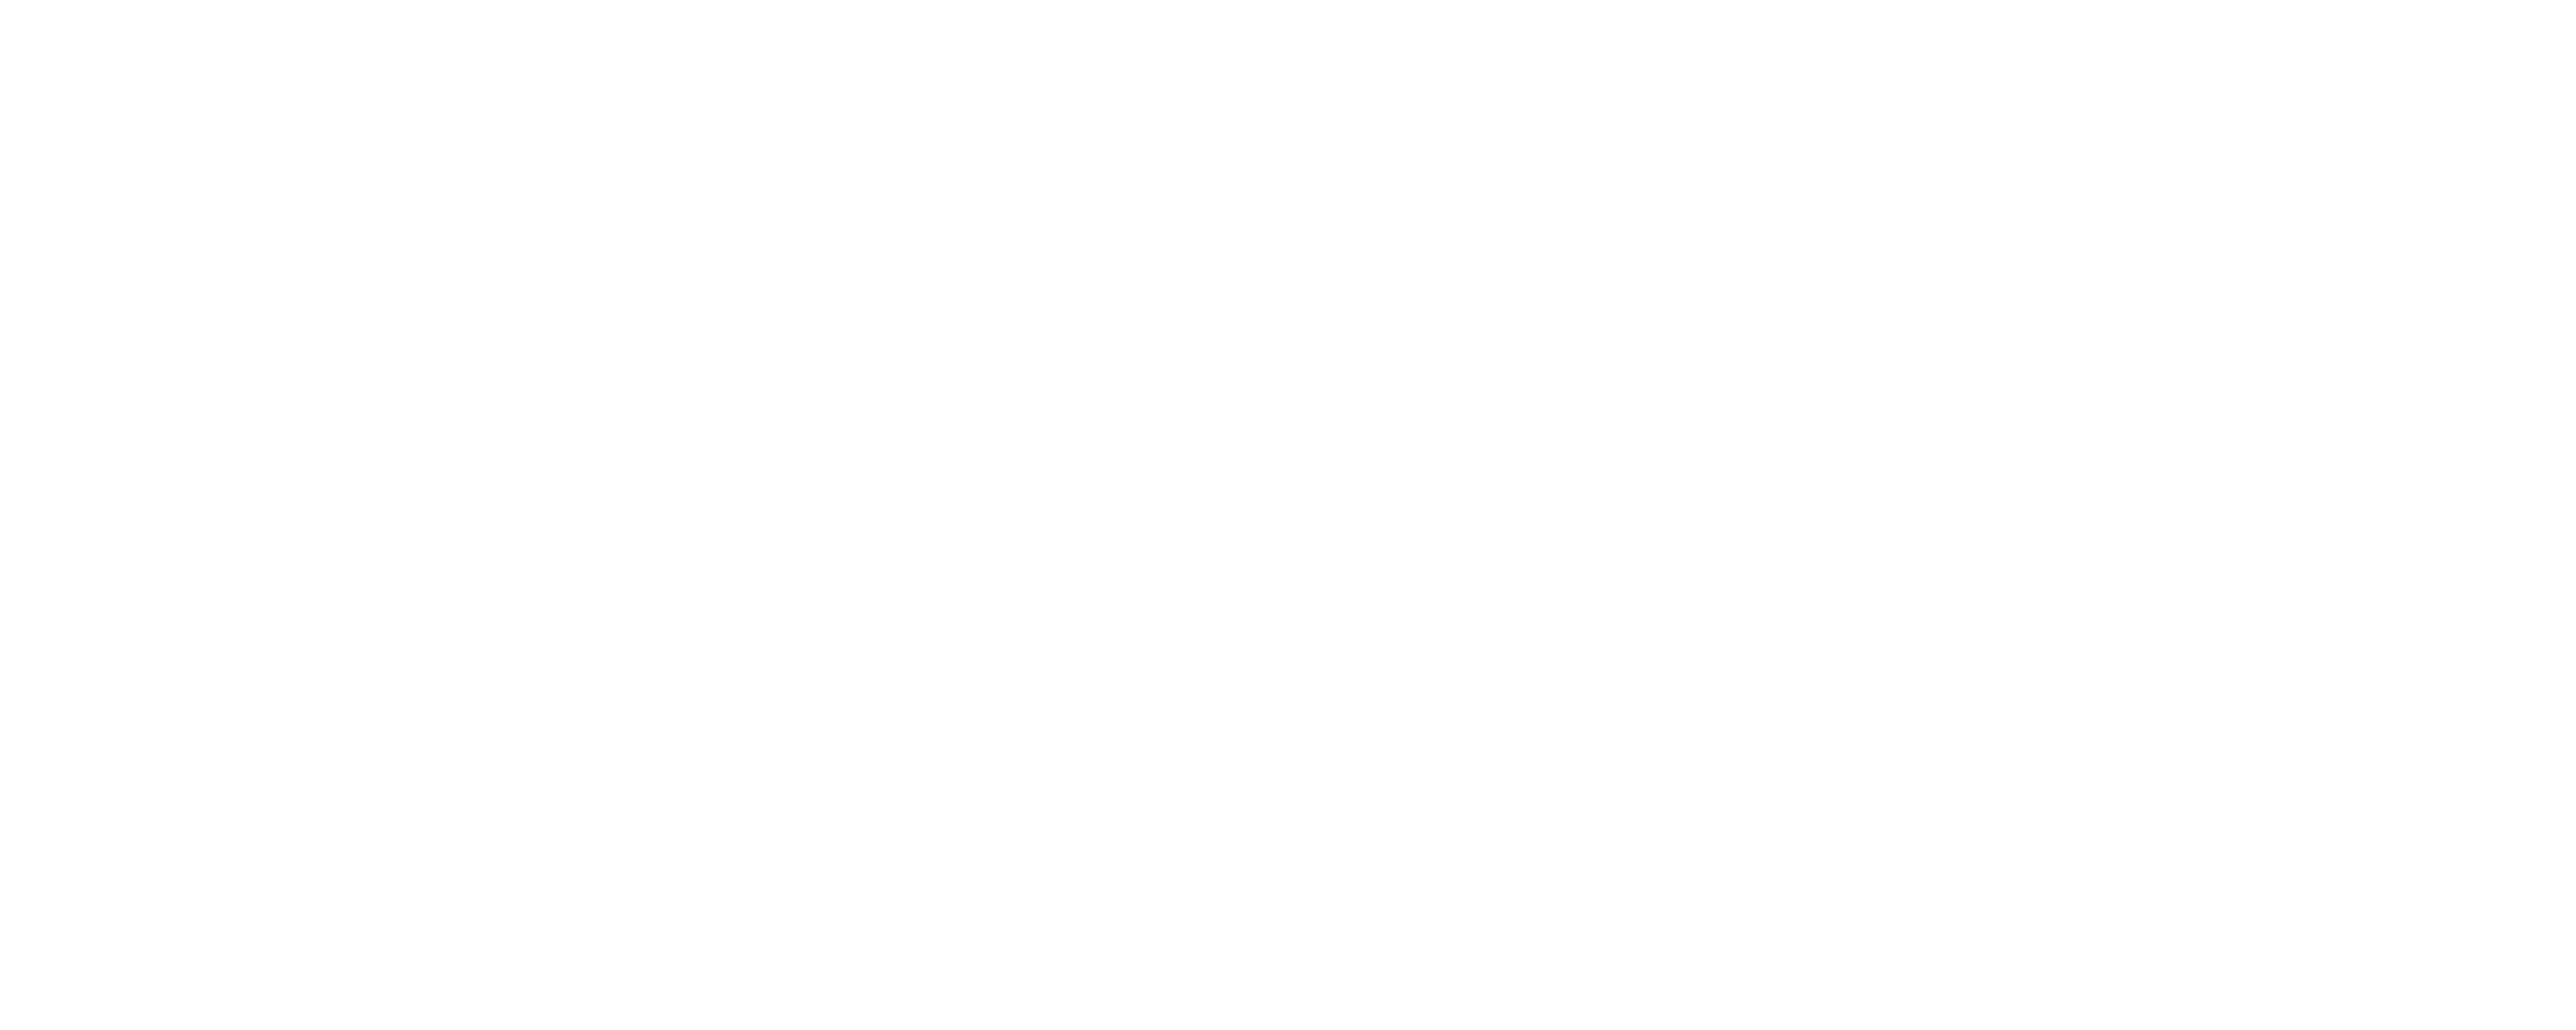 Legacy Tax Group